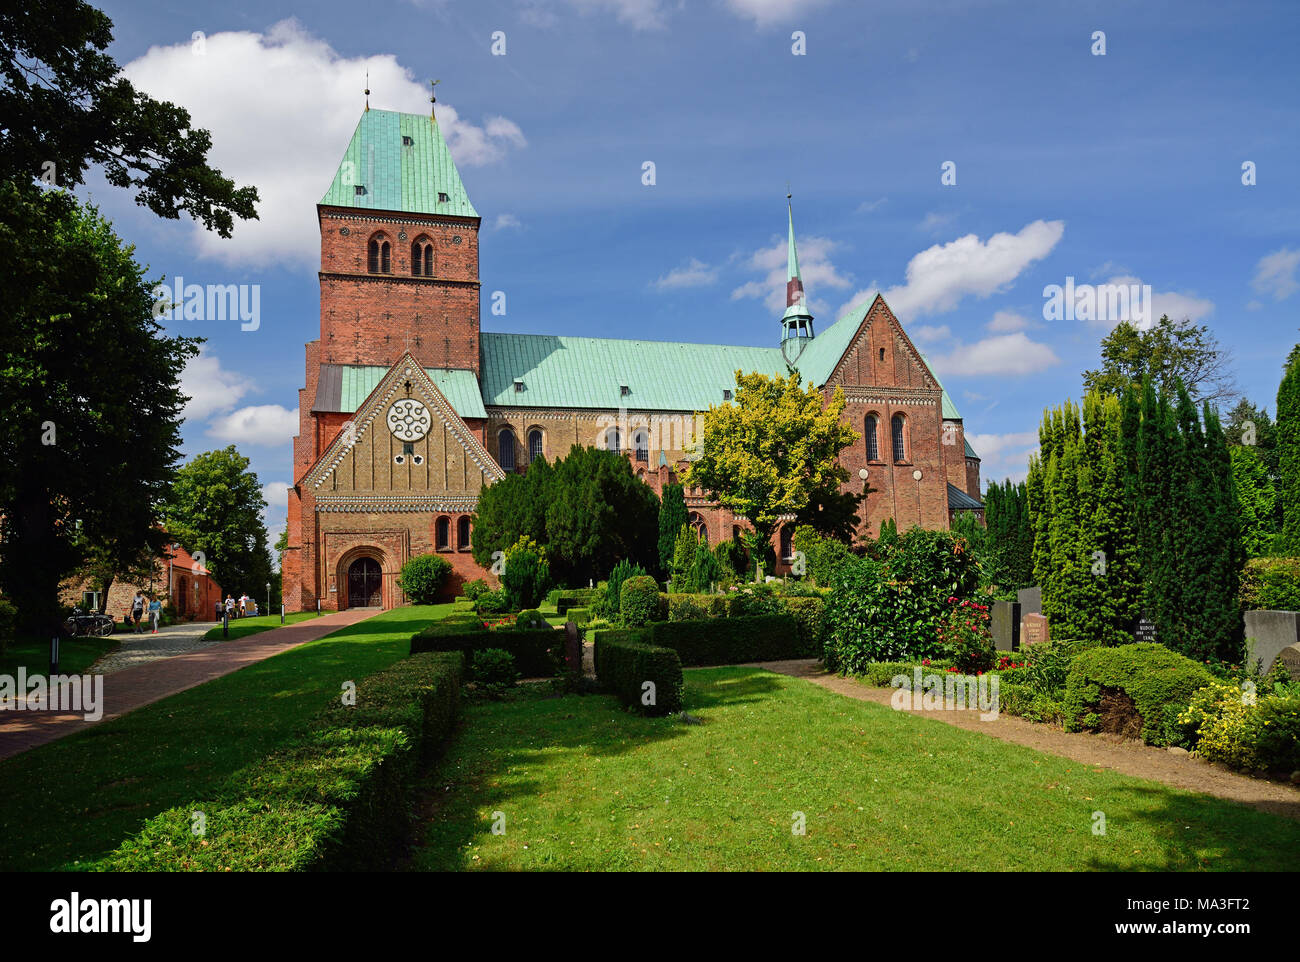 Europe, Germany, Schleswig-Holstein, Ratzeburg, cathedral, 12th/13th century Romanesque brick building, donated by Henry the Lion, Stock Photo